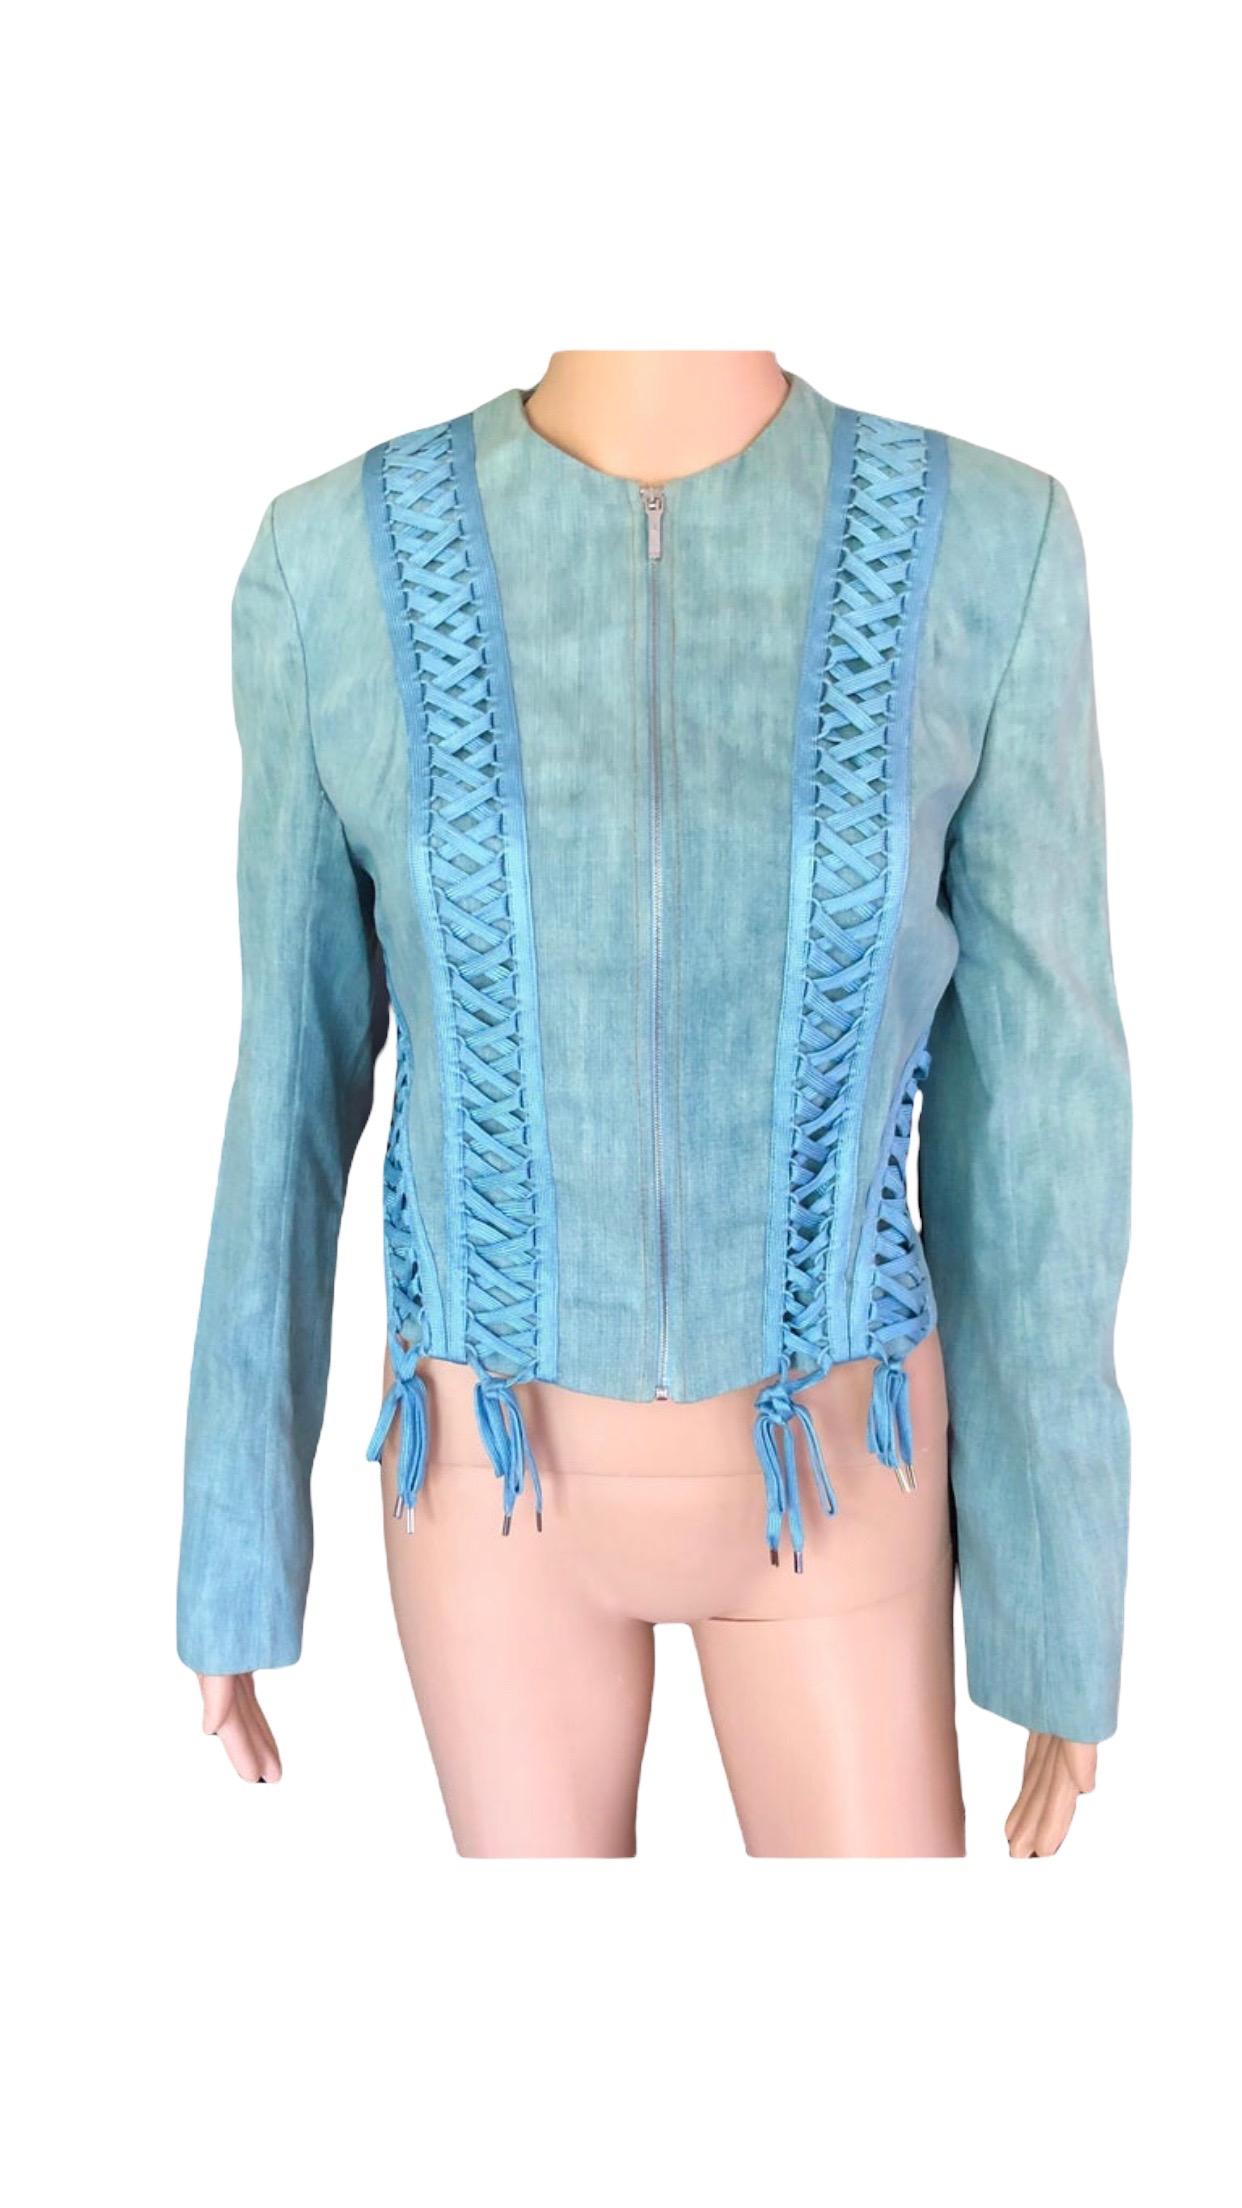 Women's Christian Dior By John Galliano S/S 2002 Lace-Up Denim Jacket